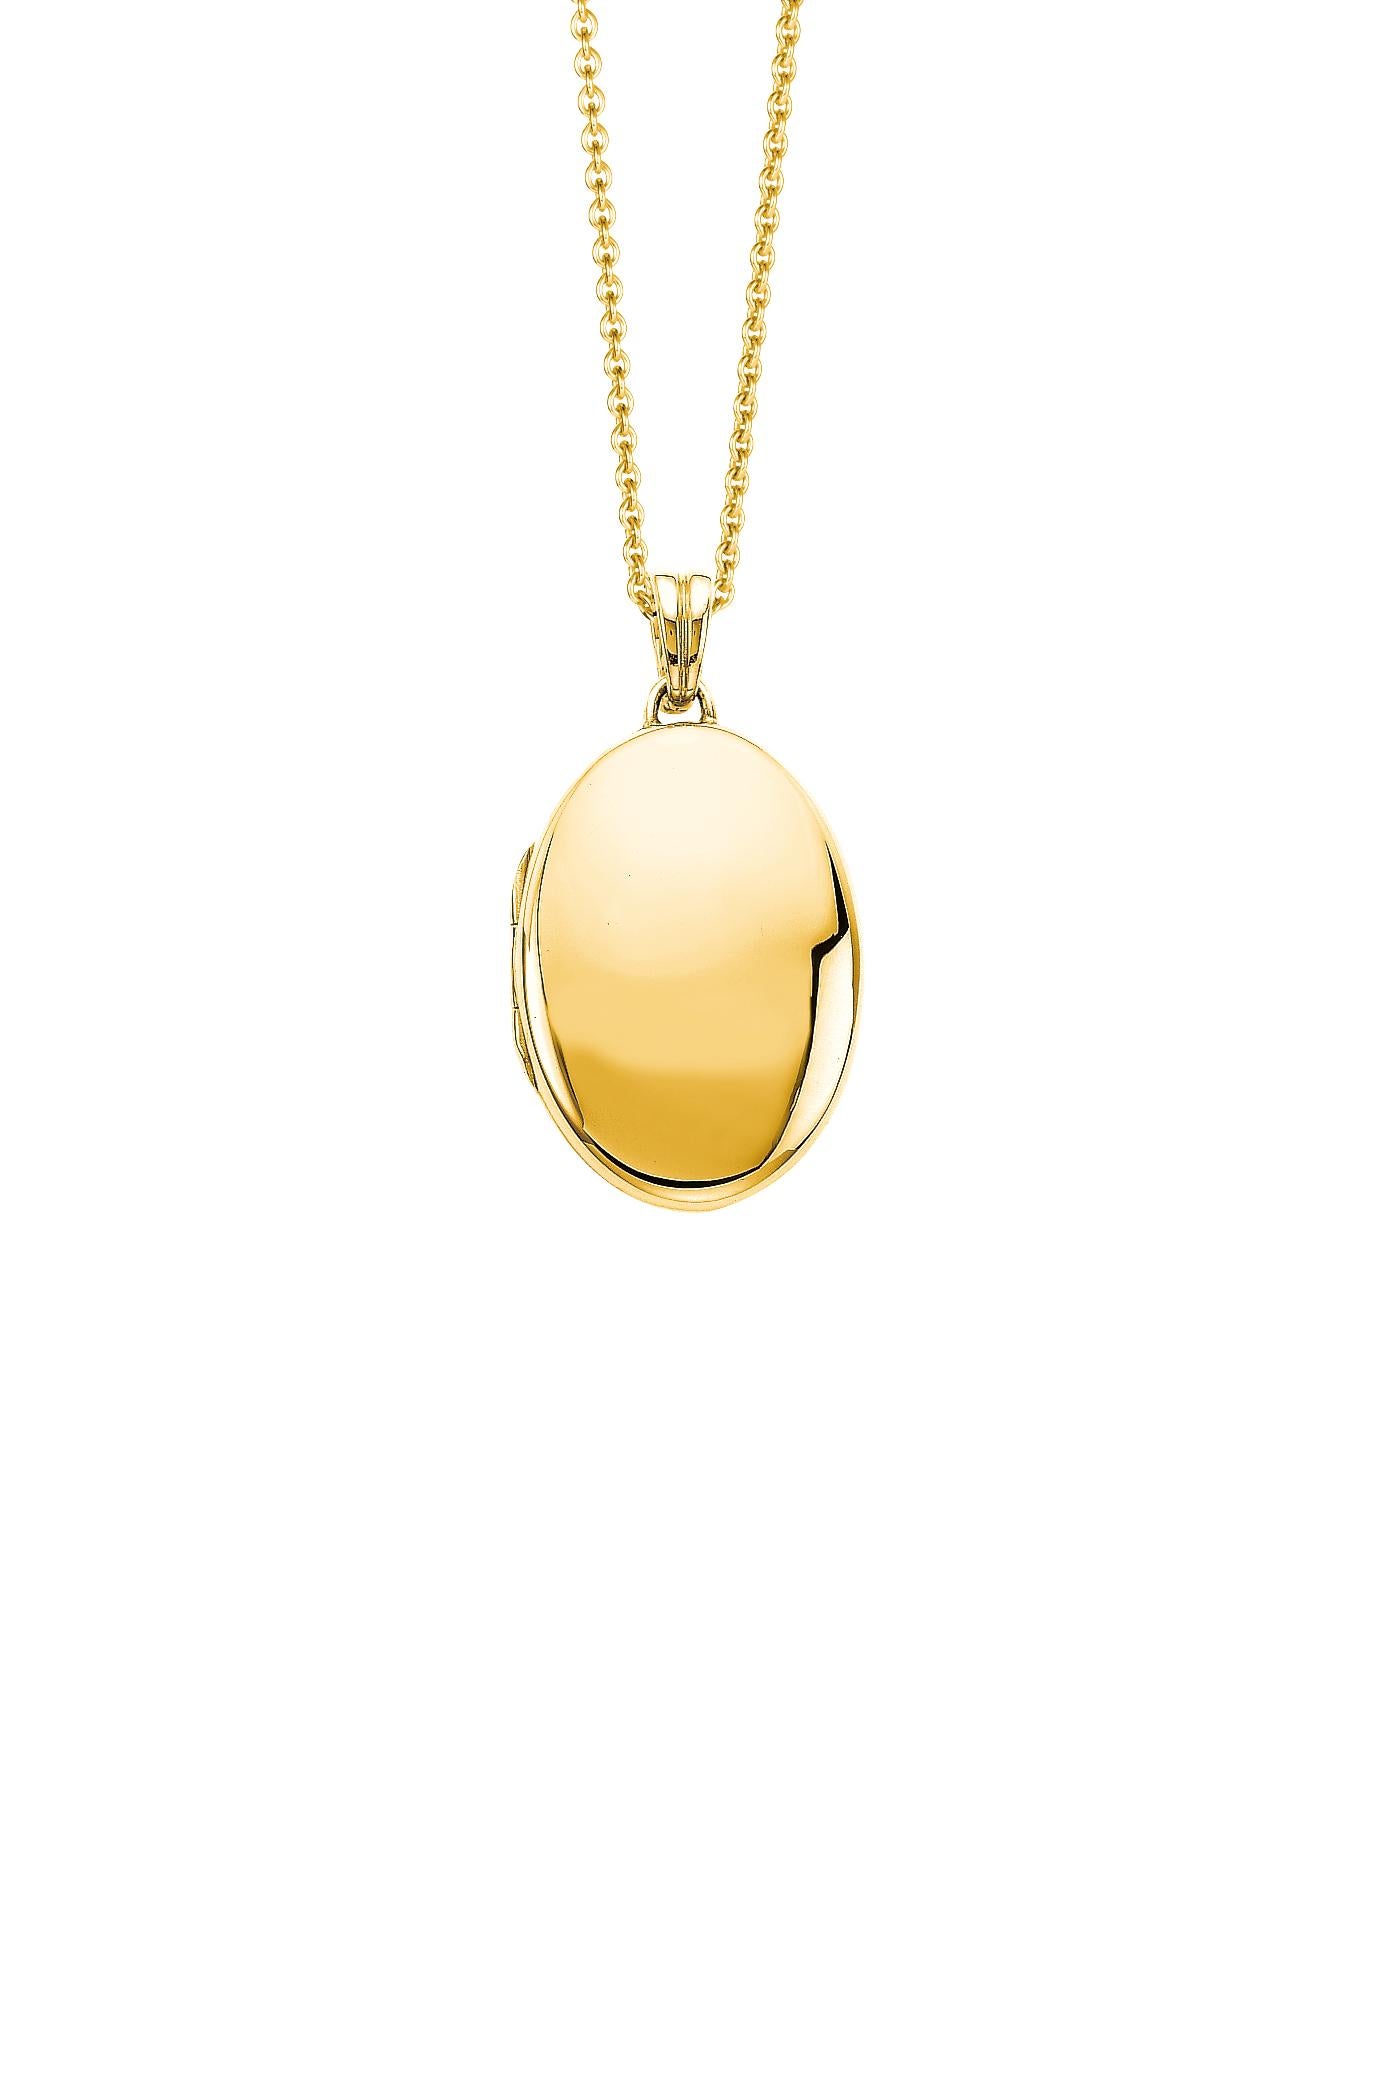 Contemporary Customizable Oval Polished Pendant Locket - 18k Yellow Gold - 25.0 mm x 36.0 mm For Sale